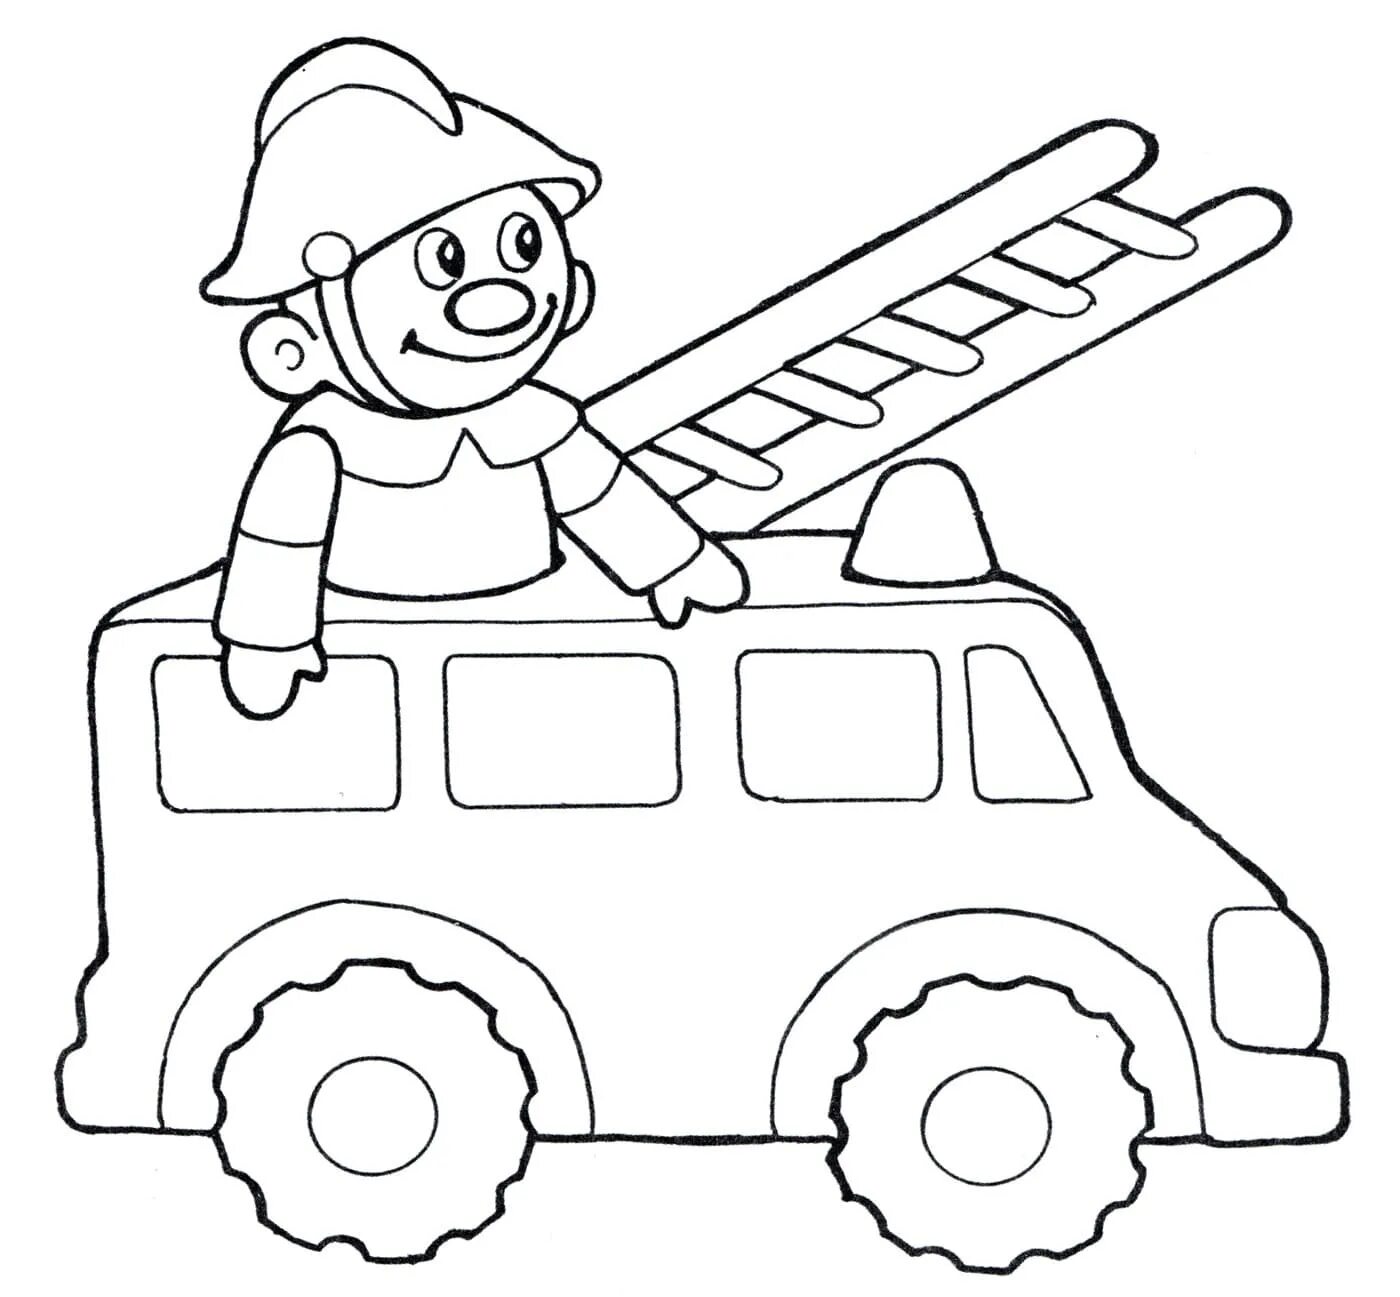 Great firetruck coloring book for teens